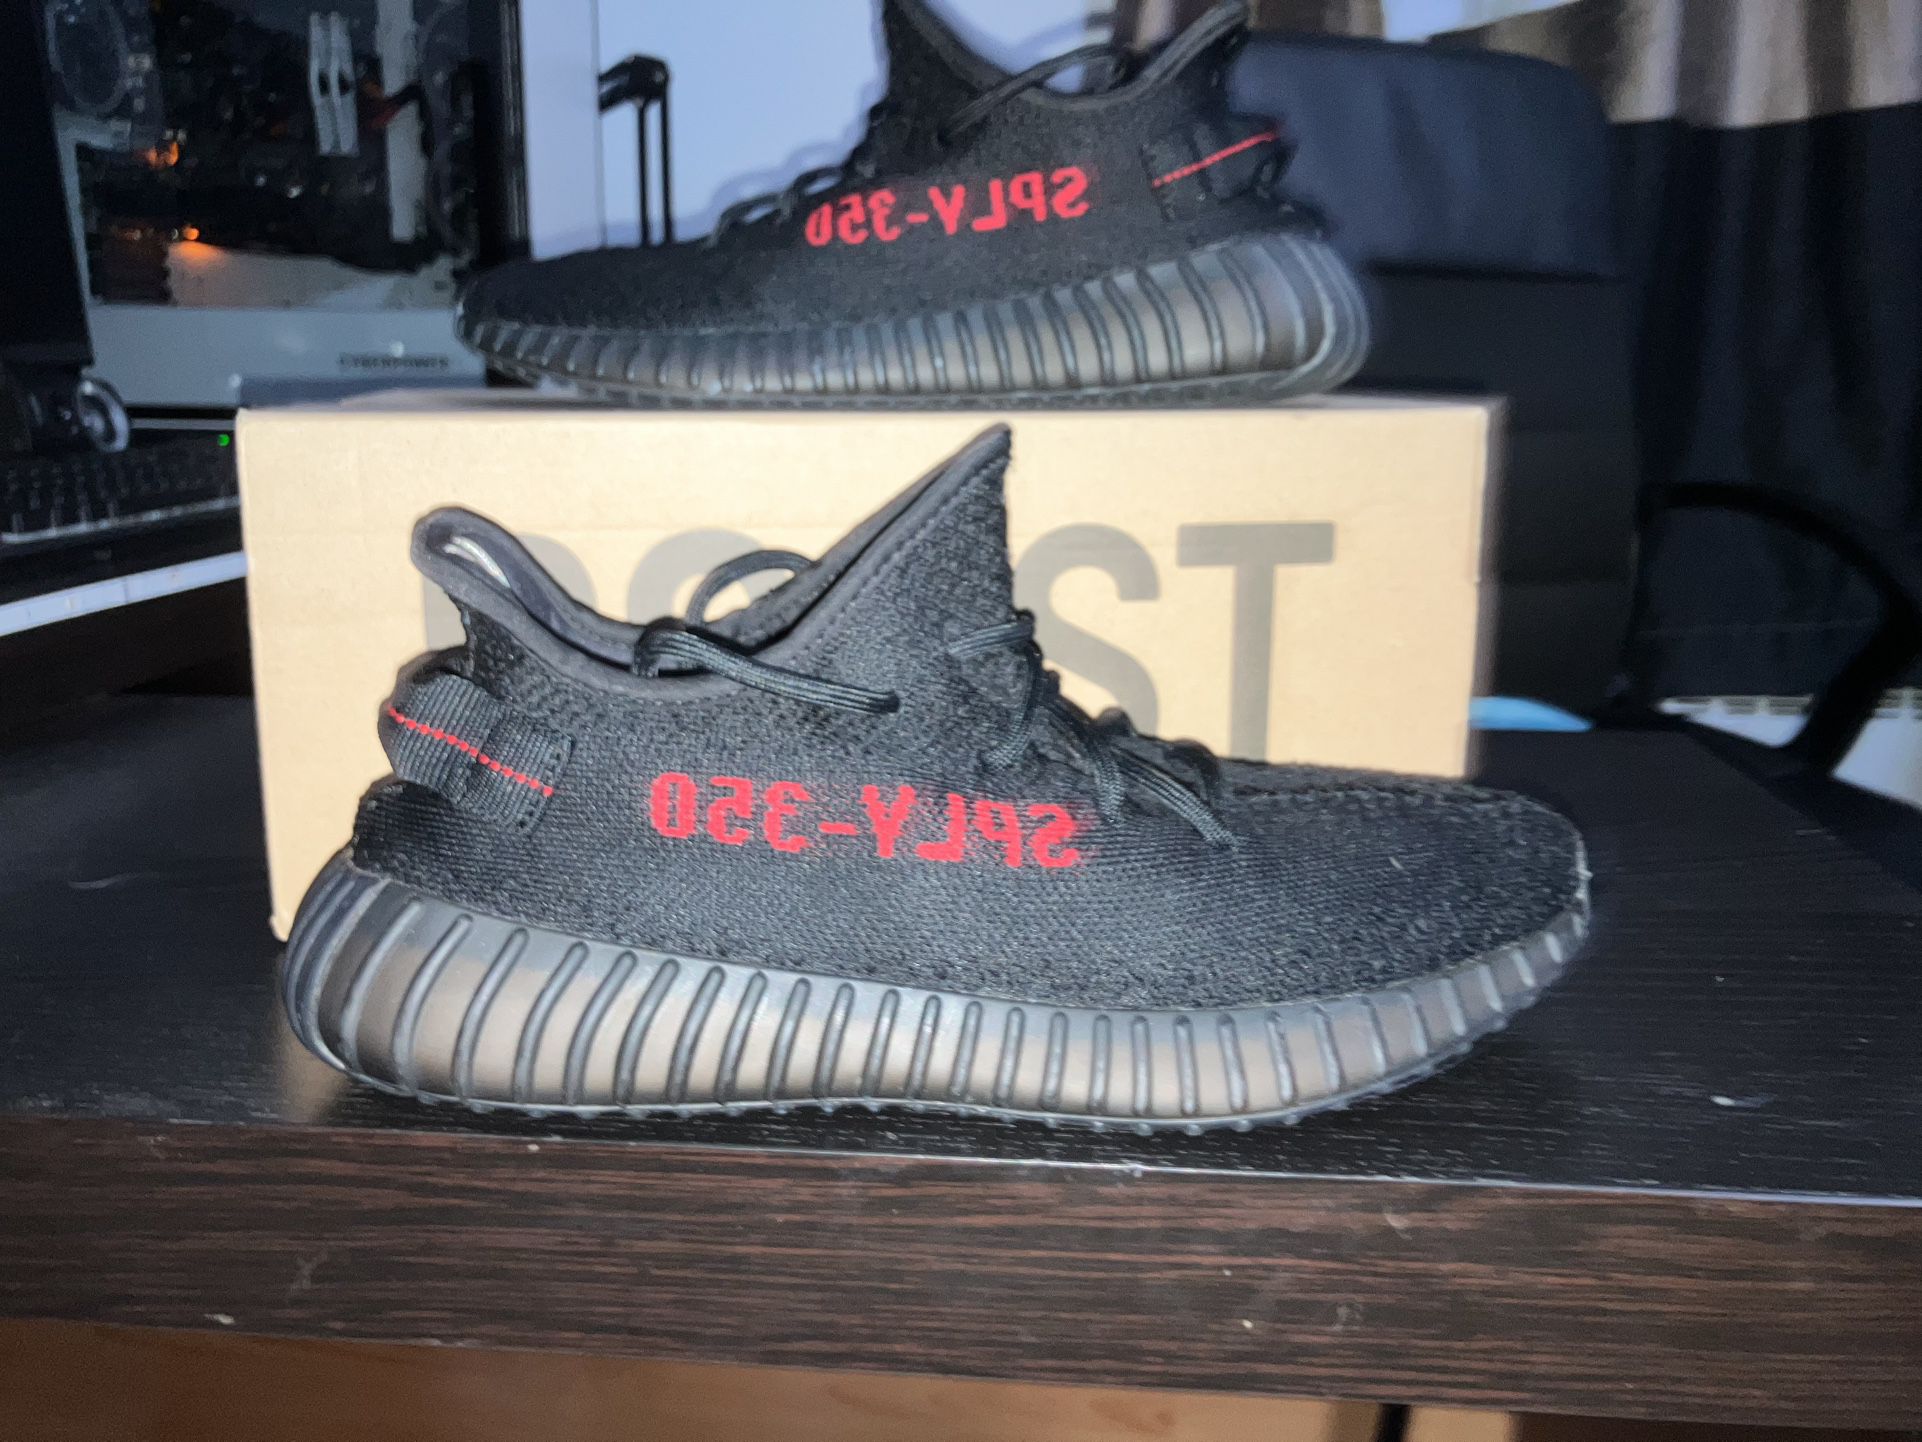 Elendighed lykke accelerator Adidas Yeezy Boost “BREDS” 350 V2 for Sale in Queens, NY - OfferUp